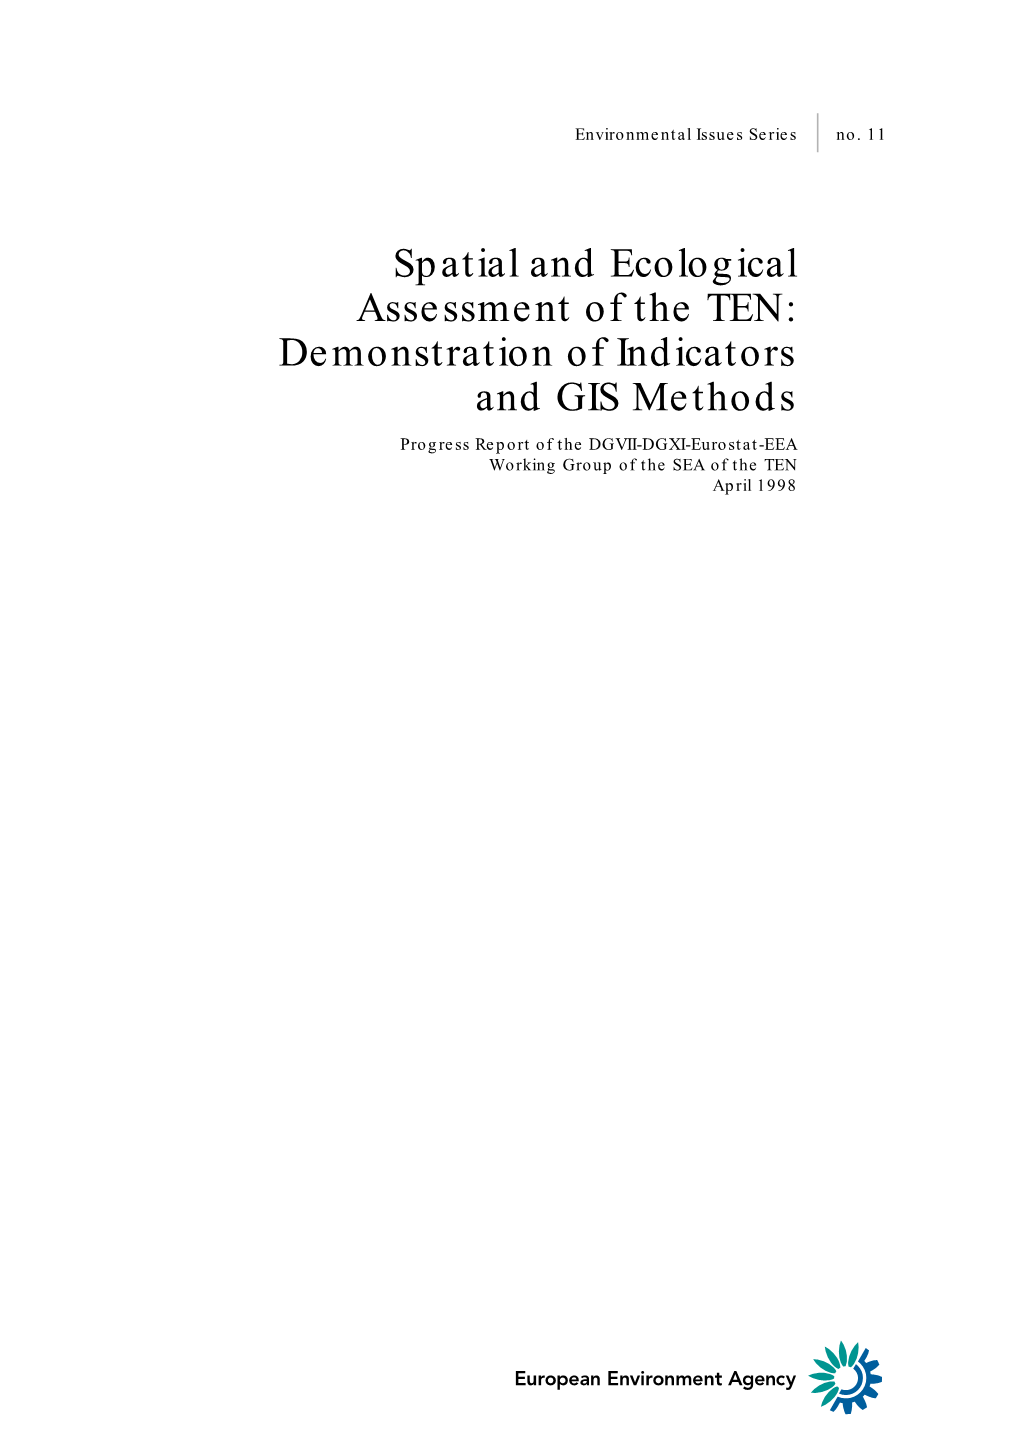 Spatial and Ecological Assessment of The